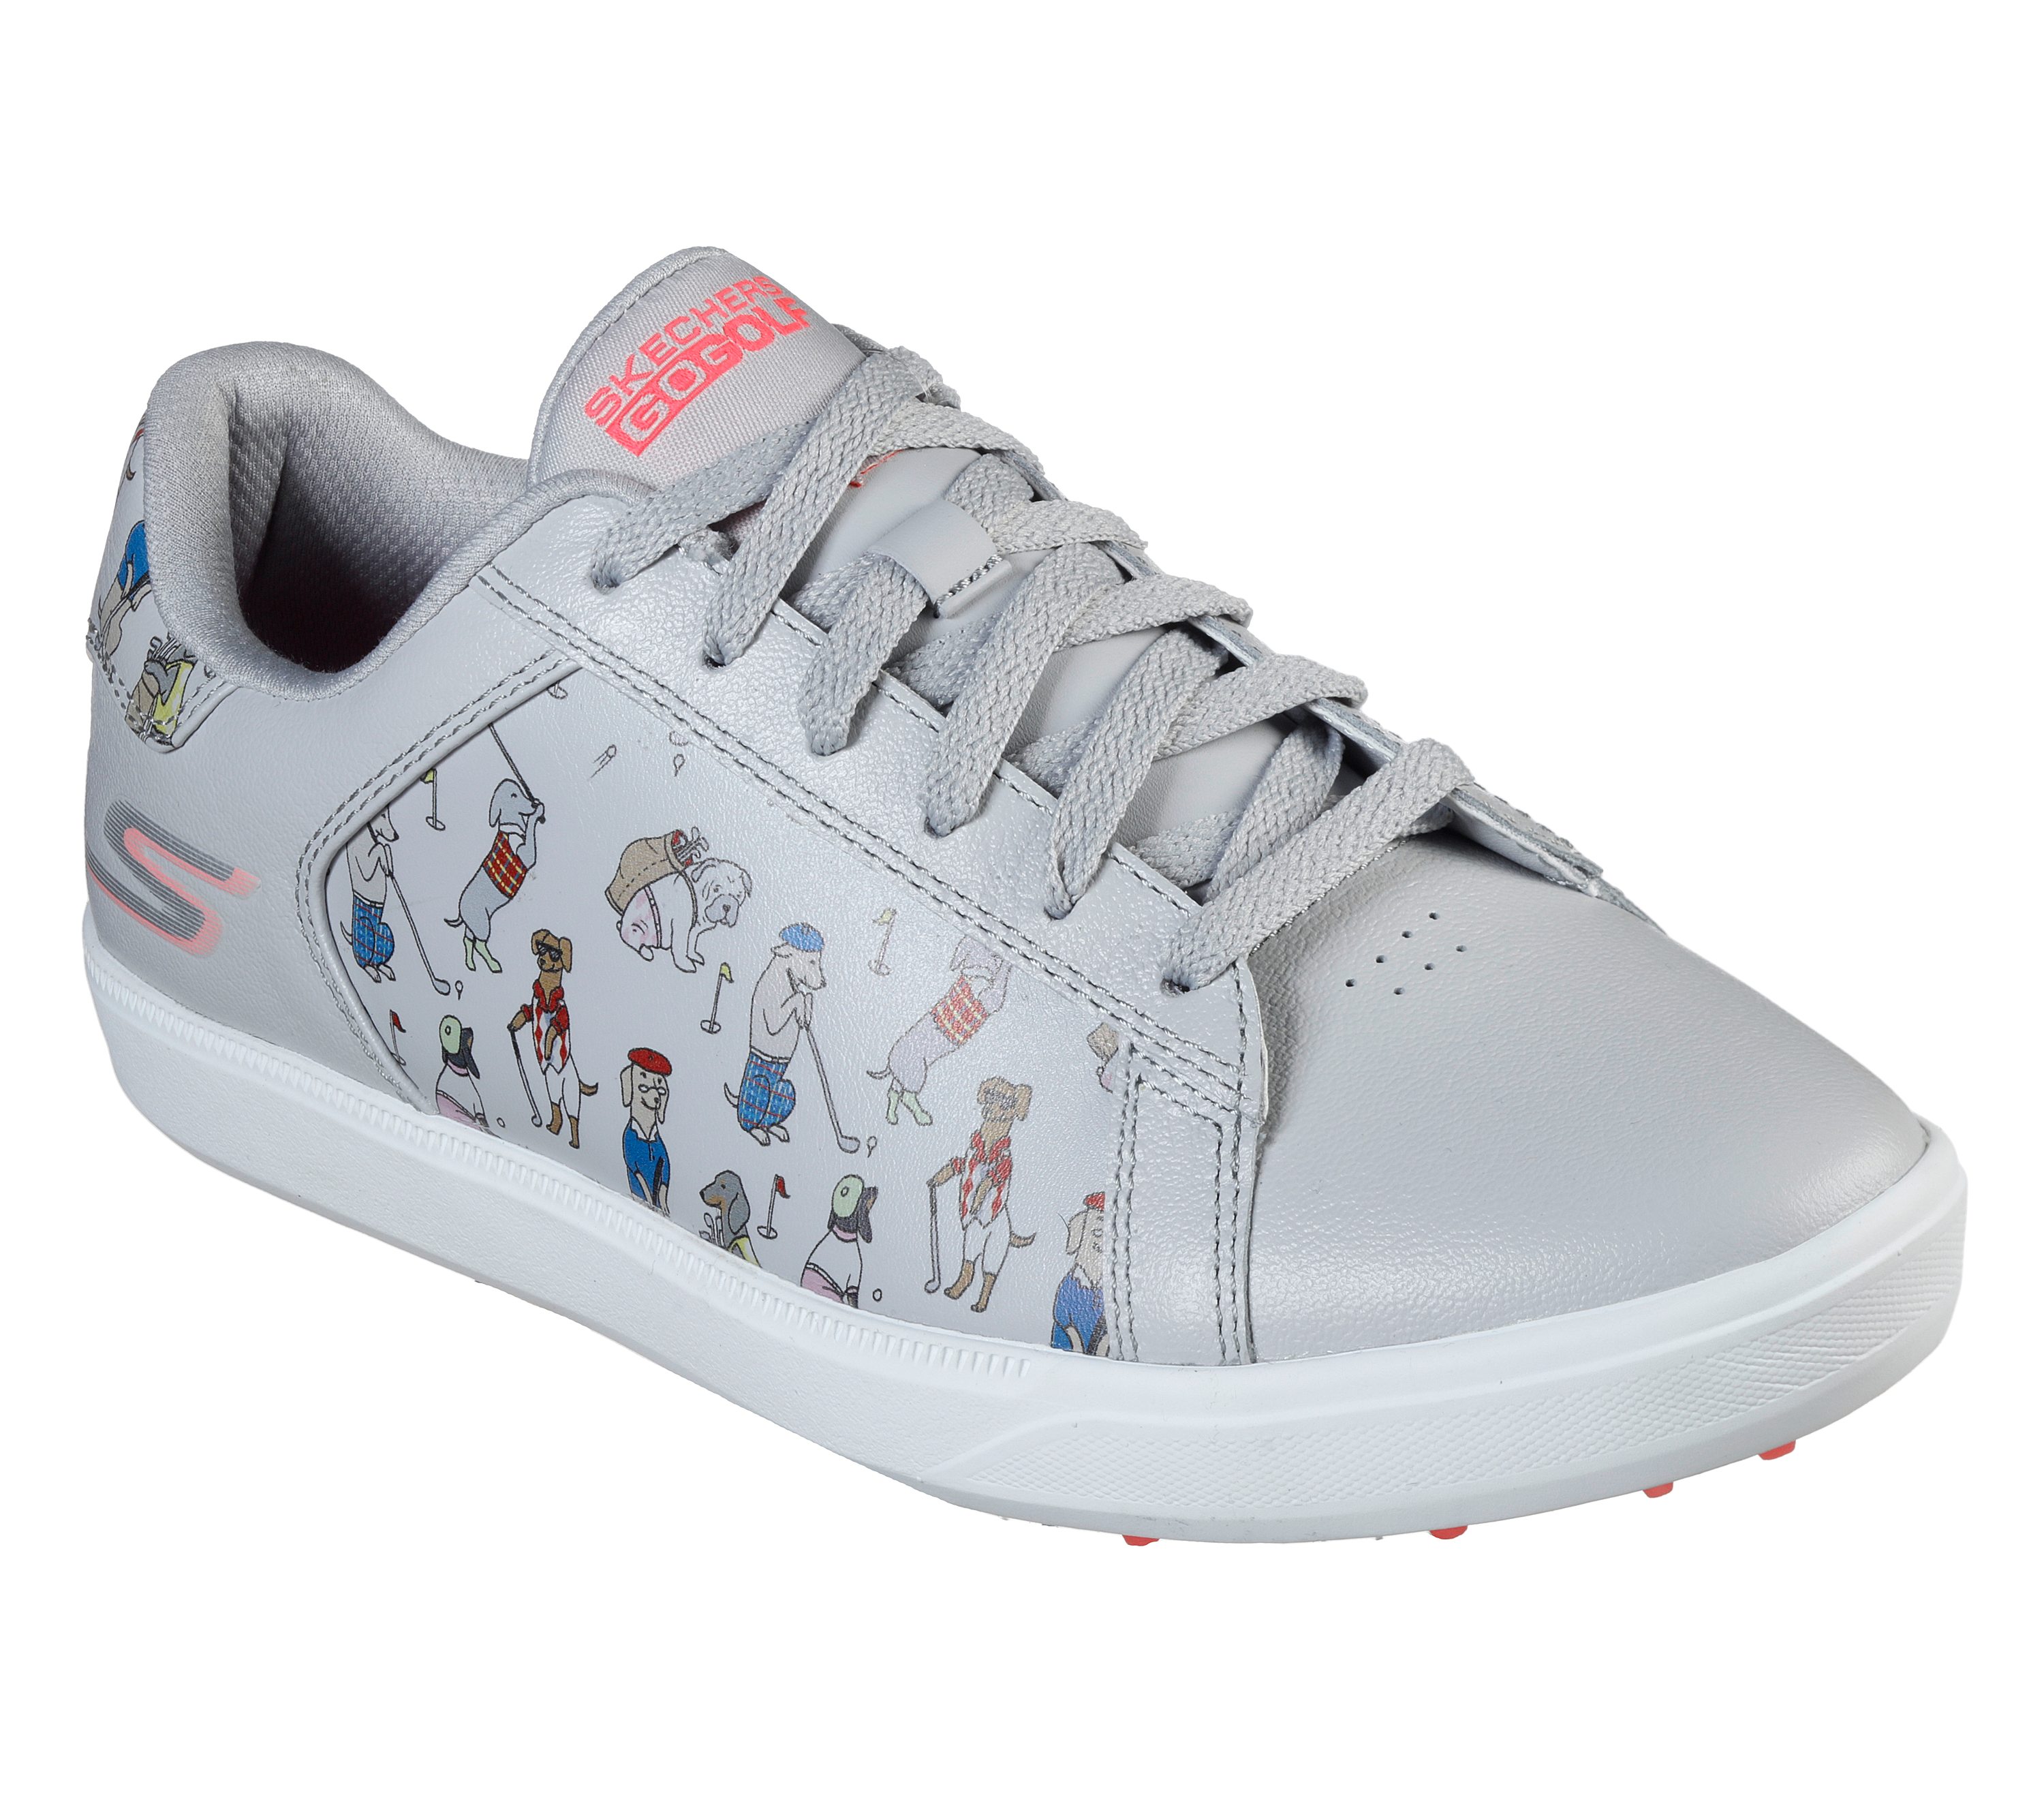 skechers shoes with dogs on them